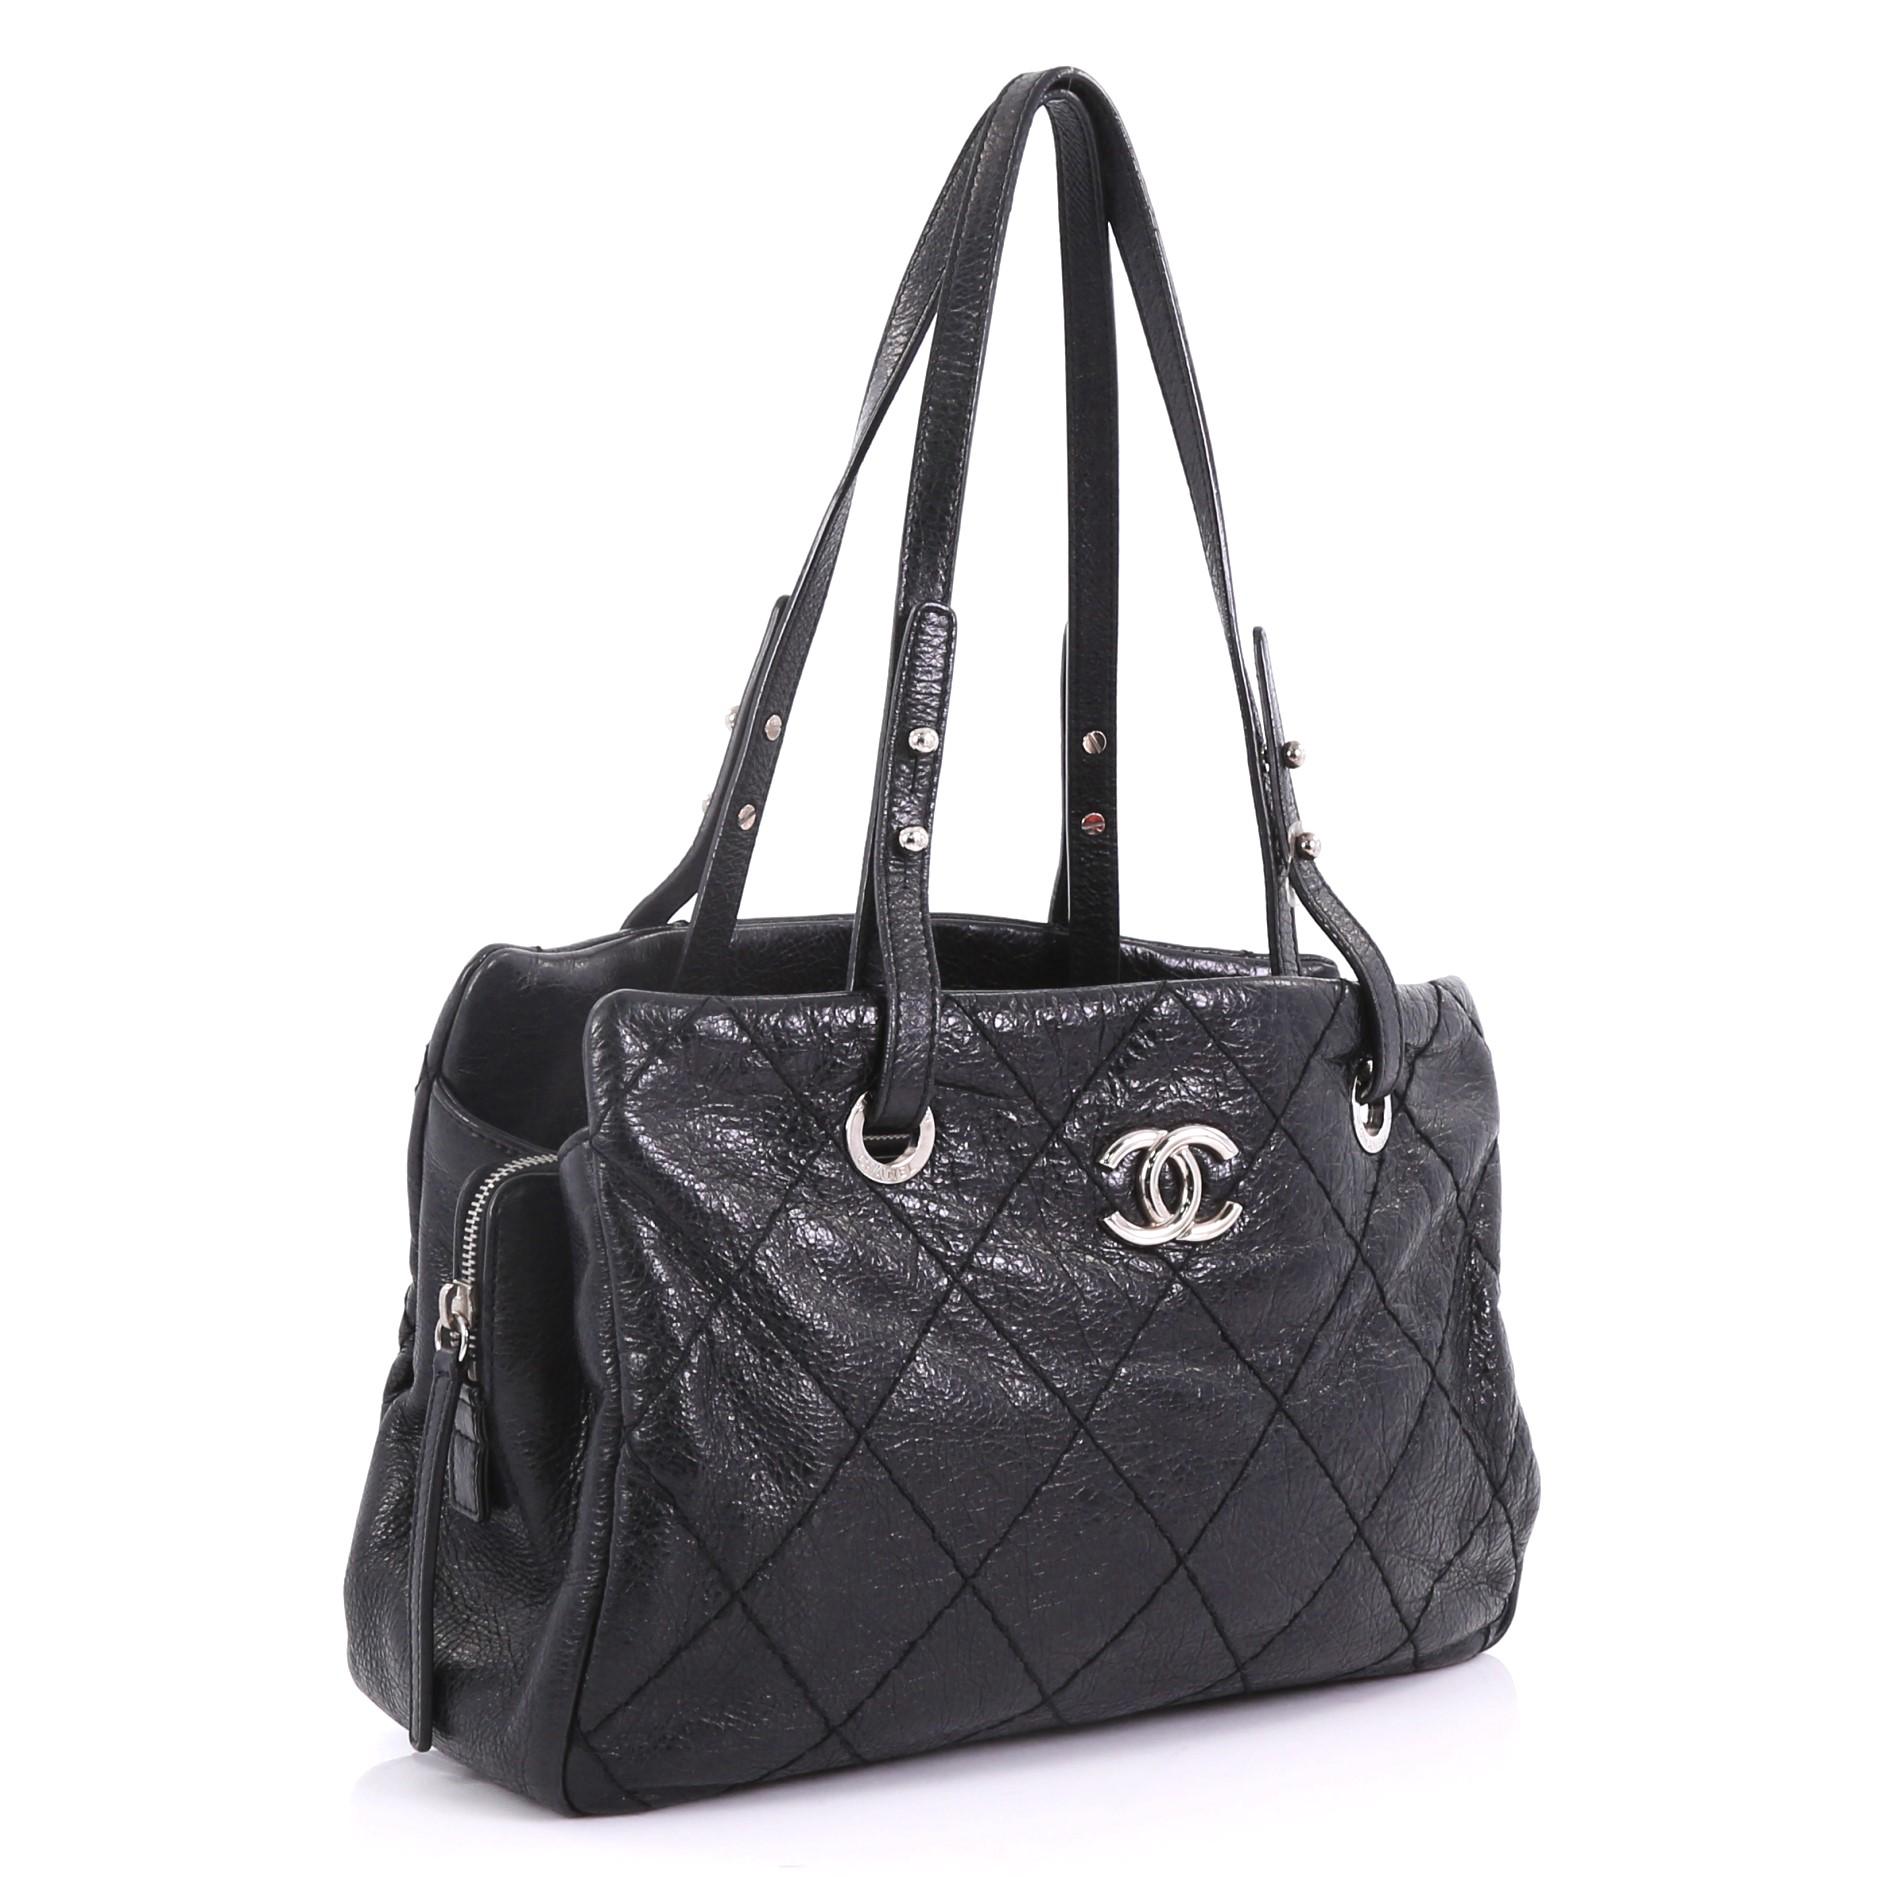 Black Chanel On The Road Shopping Tote Quilted Leather Medium